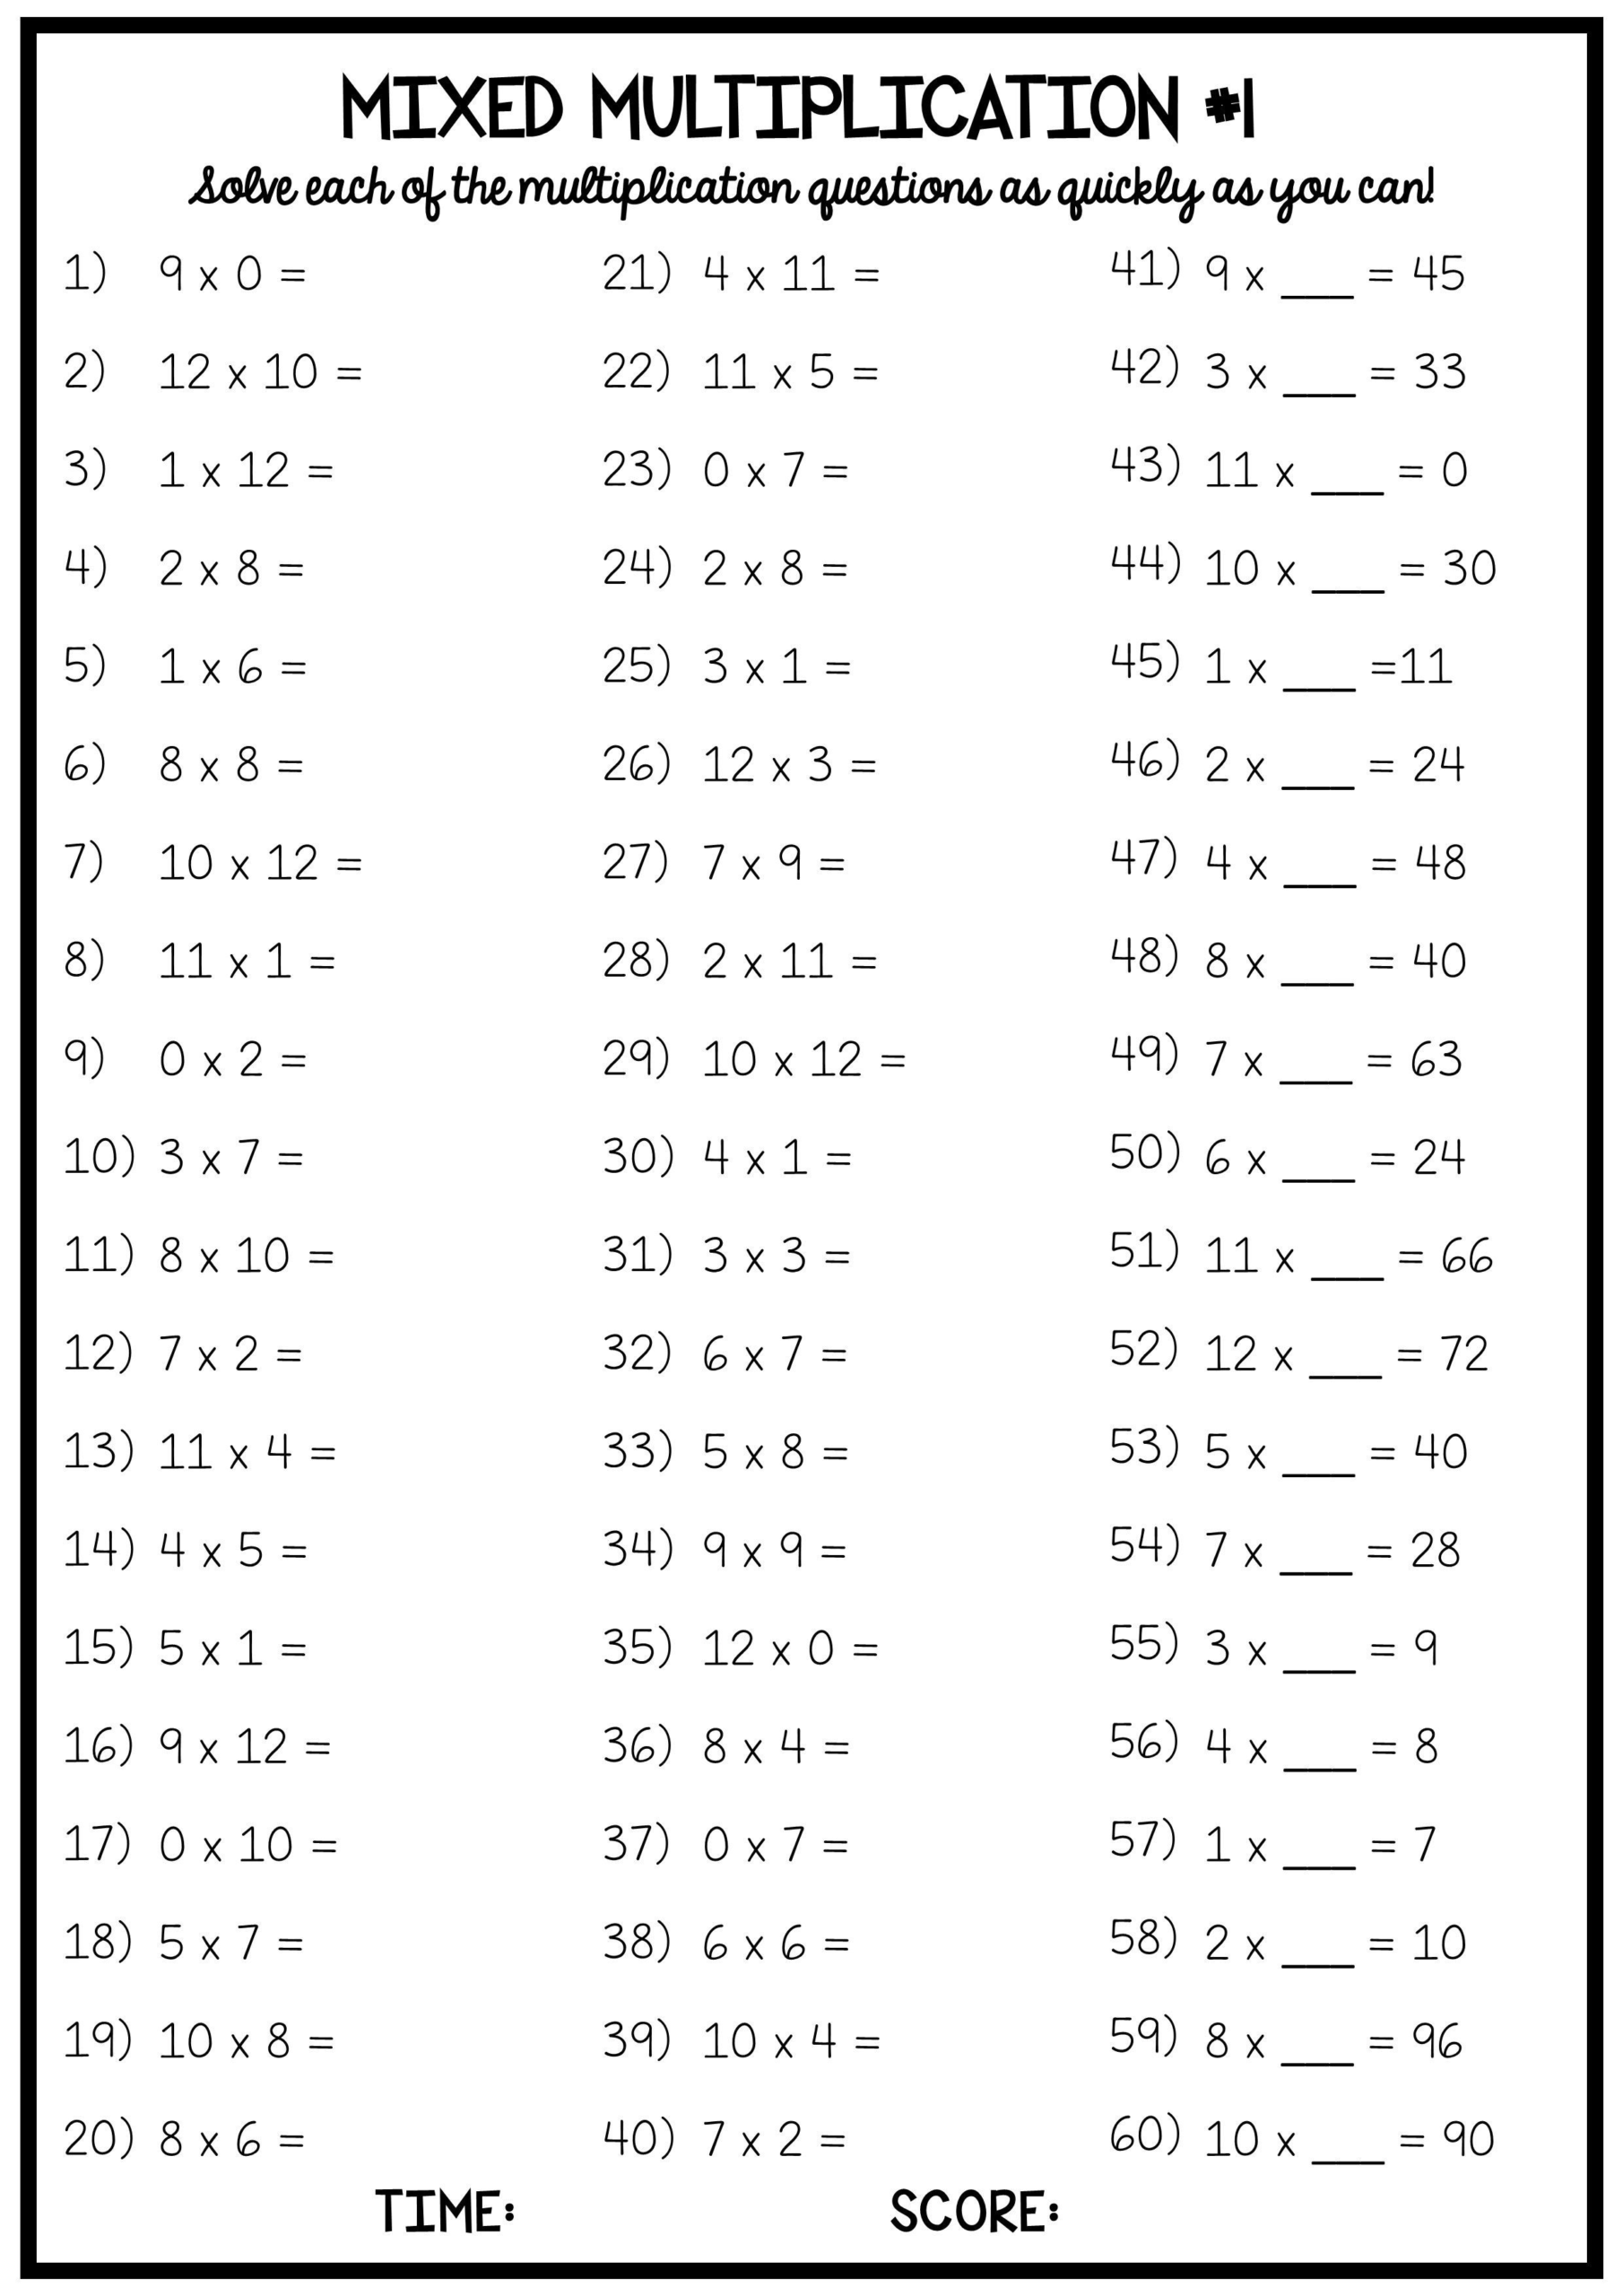 4 Times Table Multiplication And Division Worksheet